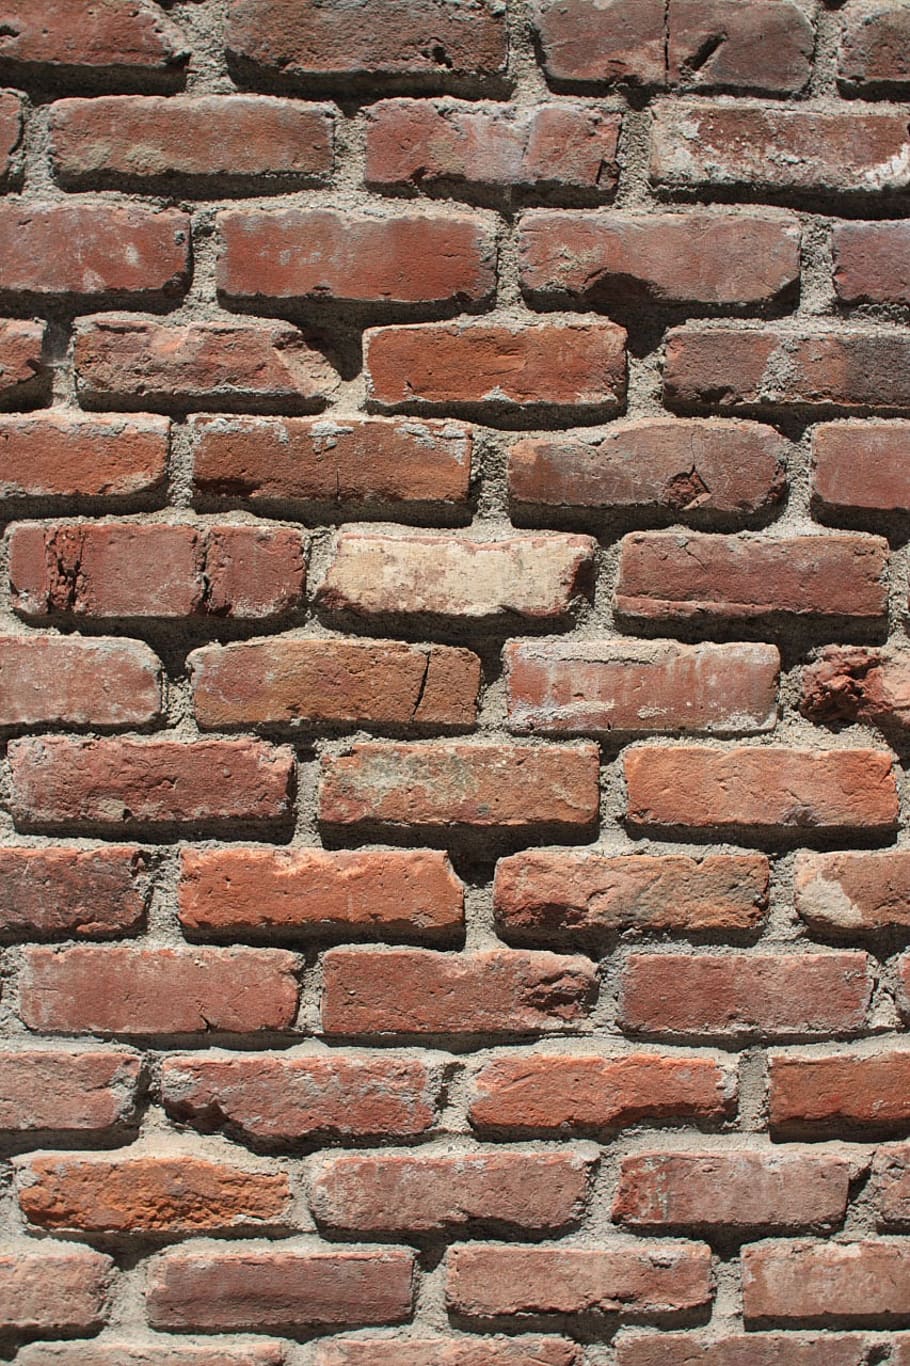 clay, brick, wall, background, red, reused, recycled, building, full frame, brick wall